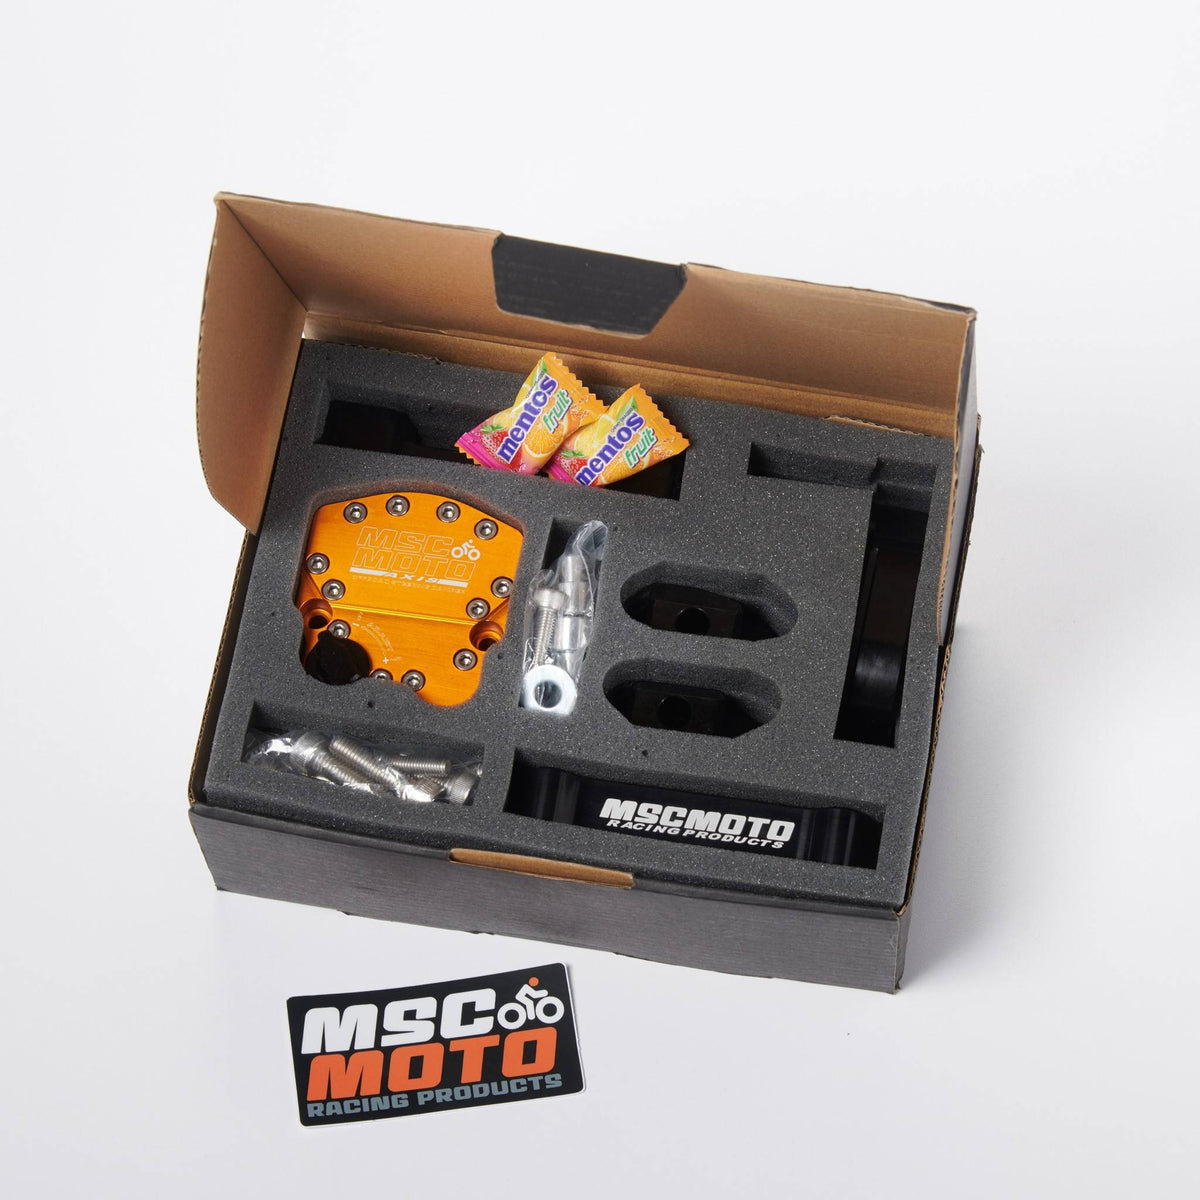 MSC Moto USA, Axis Steering Damper Kit Down Under PRO Mount (AX0003PRO) - GAS GAS (EC, MC) KTM (EXC, EXC-F, SX, SX-F, XC-W, XC-F) HUSQVARNA (TE, FE, TC, FC) HUSABERG (FE, FX, TE), AX0003PRO, axis, gas gas, husaberg, husaberg-2011-te-125-esi3907738, husqvarna, ktm, ktm-2001-520-exc-esi3441012,  - Ultra High Quality steering damper kits for Motocross, Enduro, Trail, Dual Sport, and Adventure Bikes. Made in Australia since 1995 - Imported and distributed in North &amp; South America by Lindeco Genuine Powersports